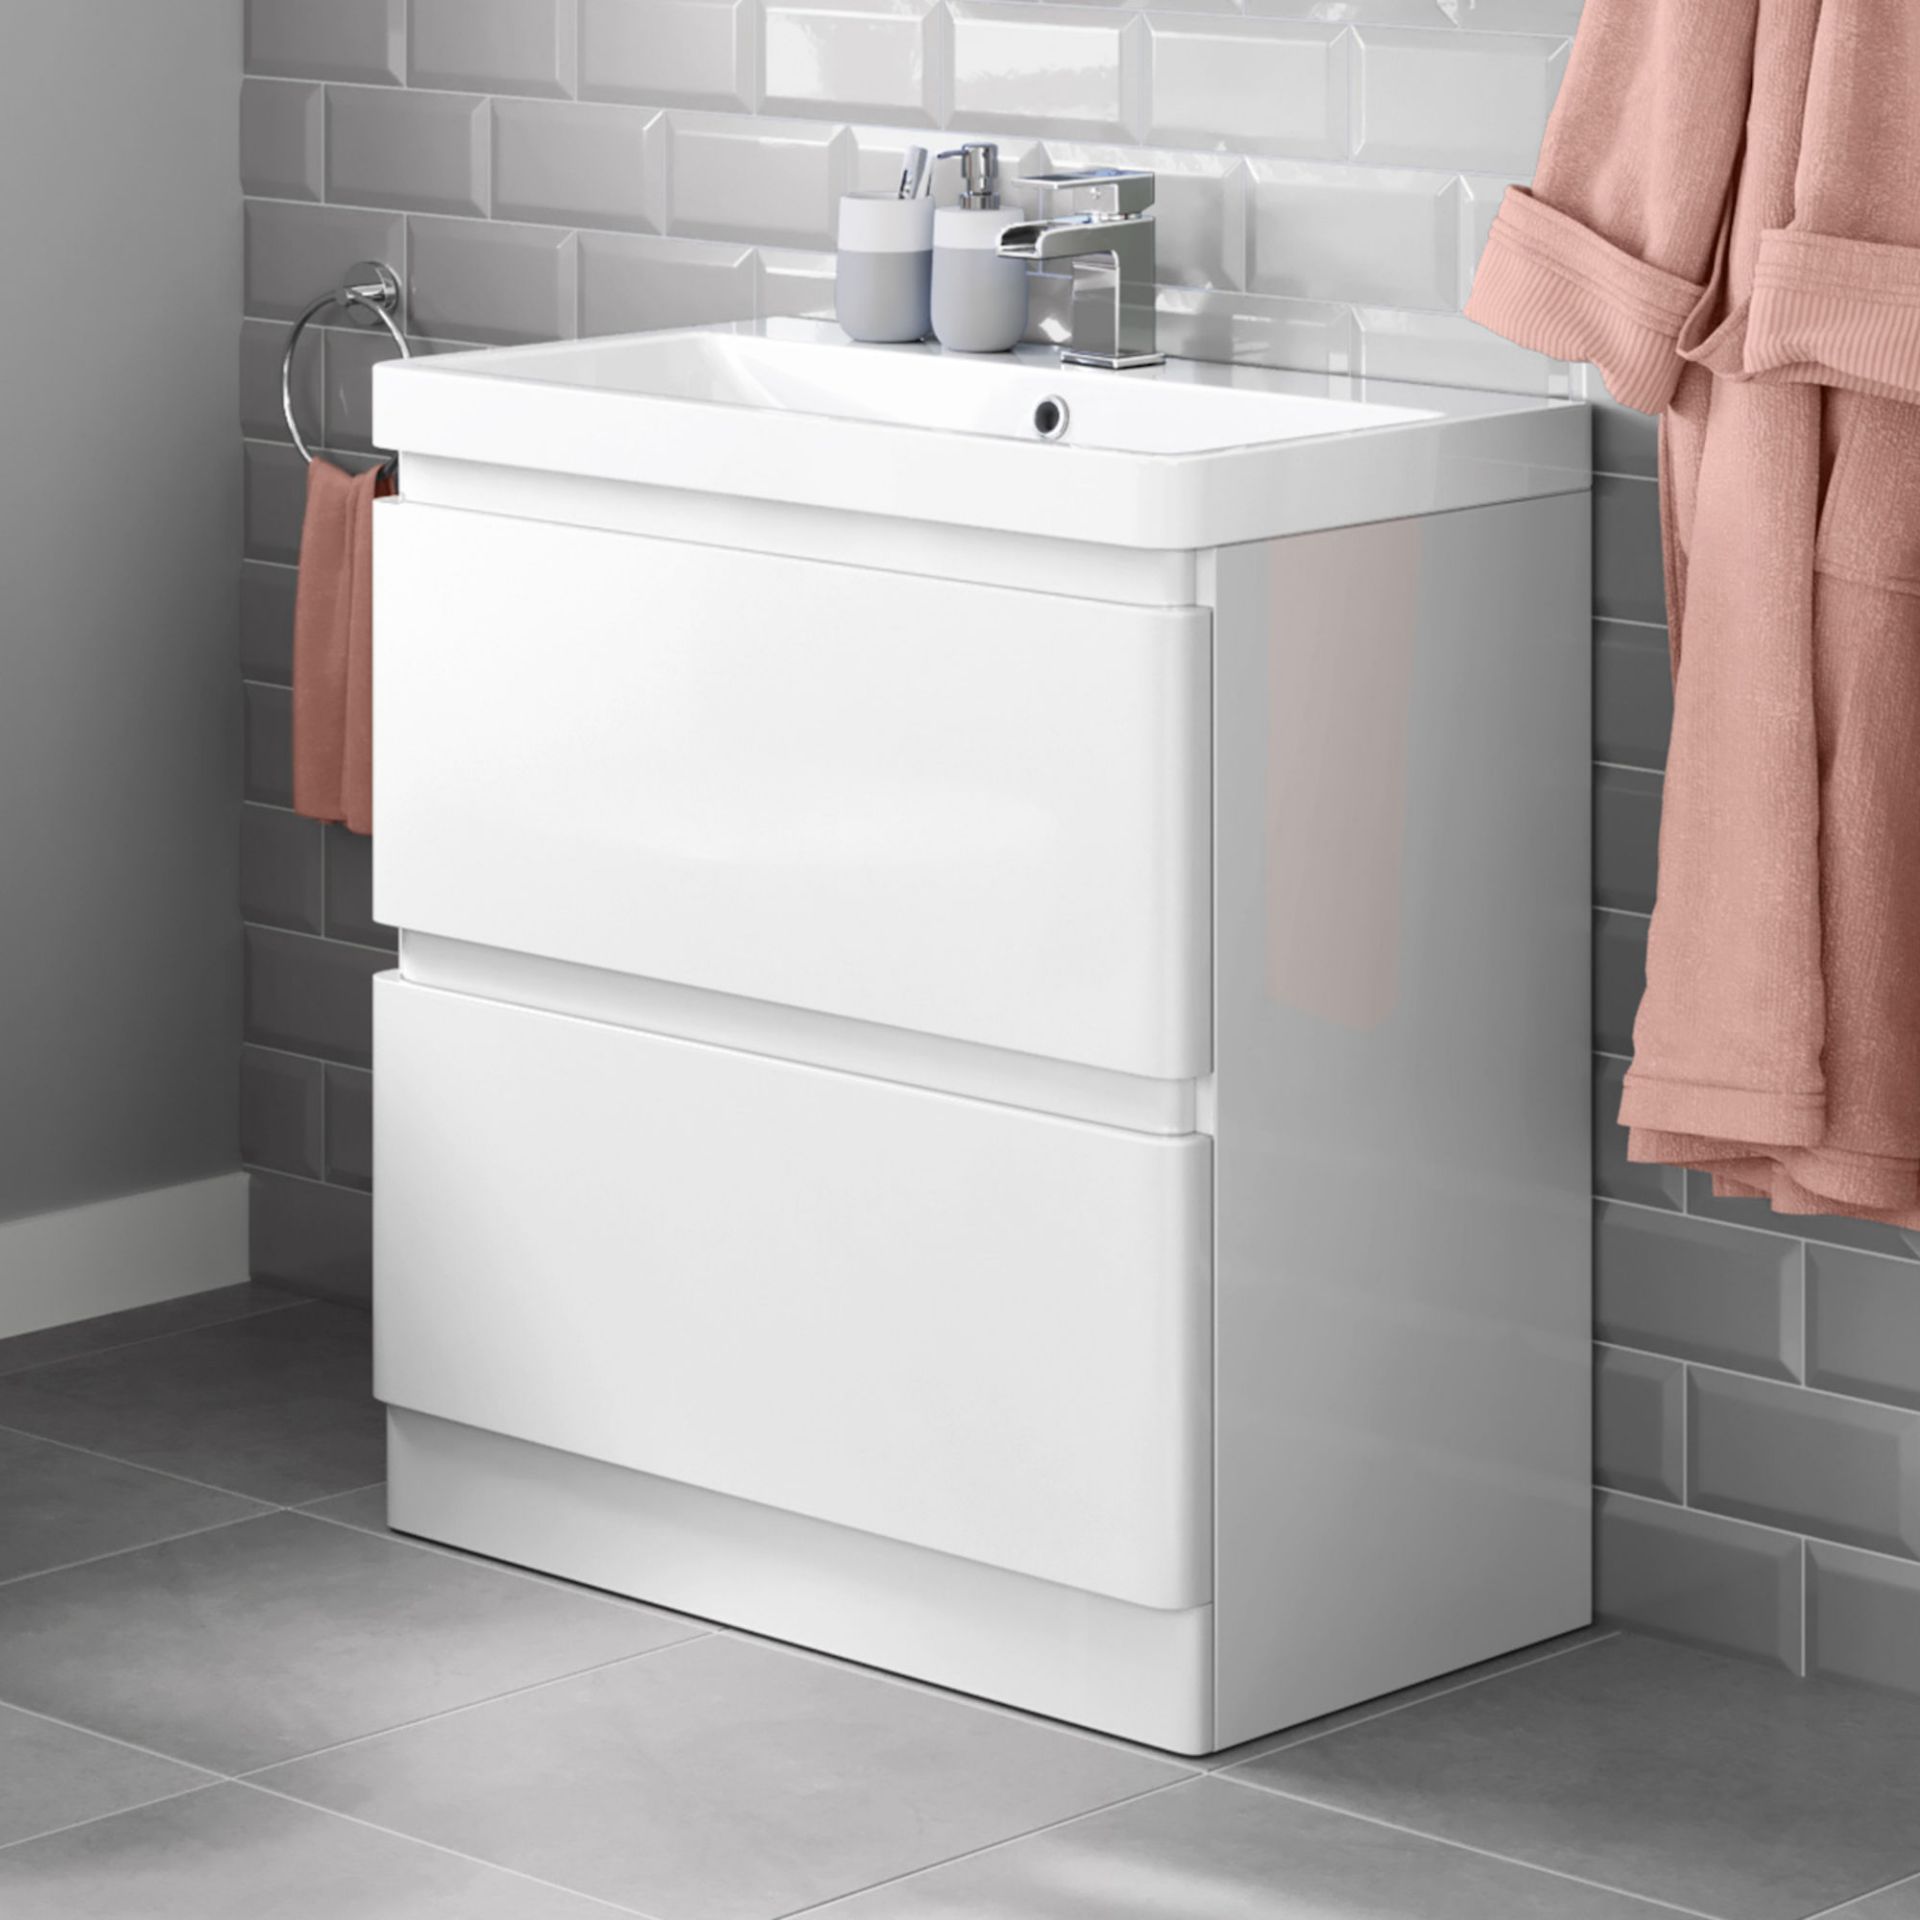 (CP5) 800mm Denver II Standing Cabinet High Gloss White + Washbasin. RRP £549.99. Comes comple...